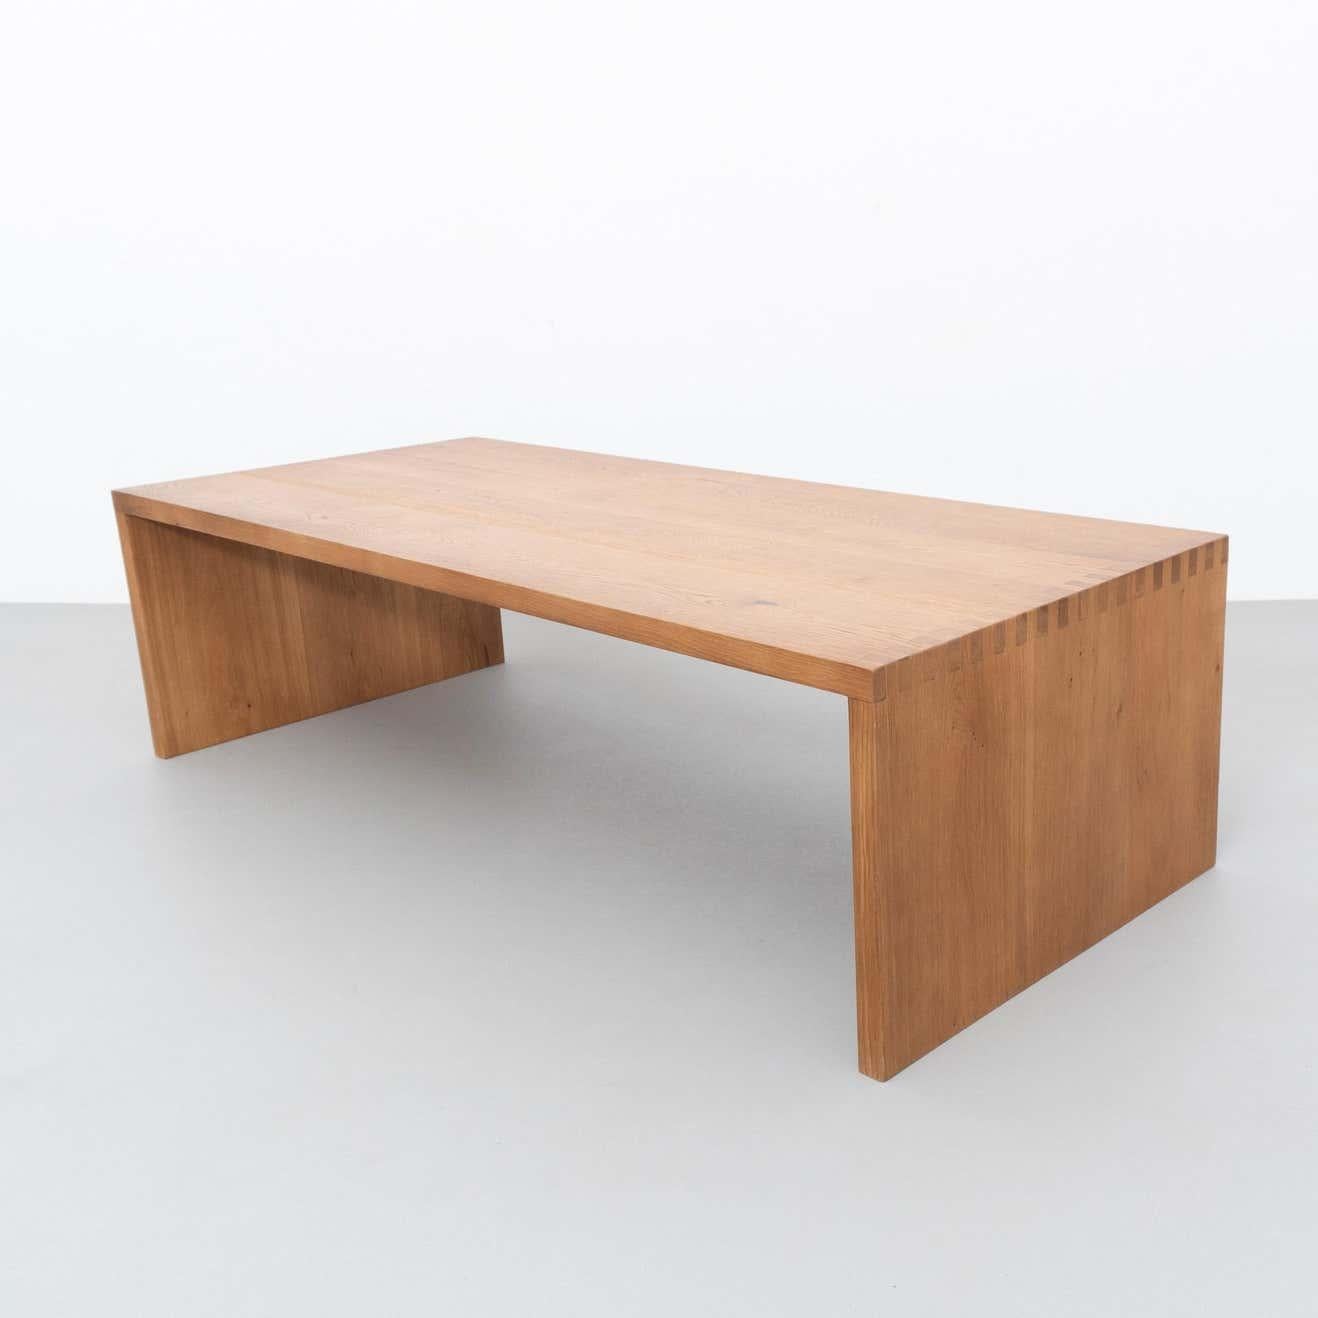 Table by Dada Est. manufactured in Barcelona, 2021.

 Oak table

Measures: 62 cm D x 140 cm W x 40 cm H 

There is the possibility of making it in different measures and woods.

Dada Est. Makes a handmade furniture production with the best